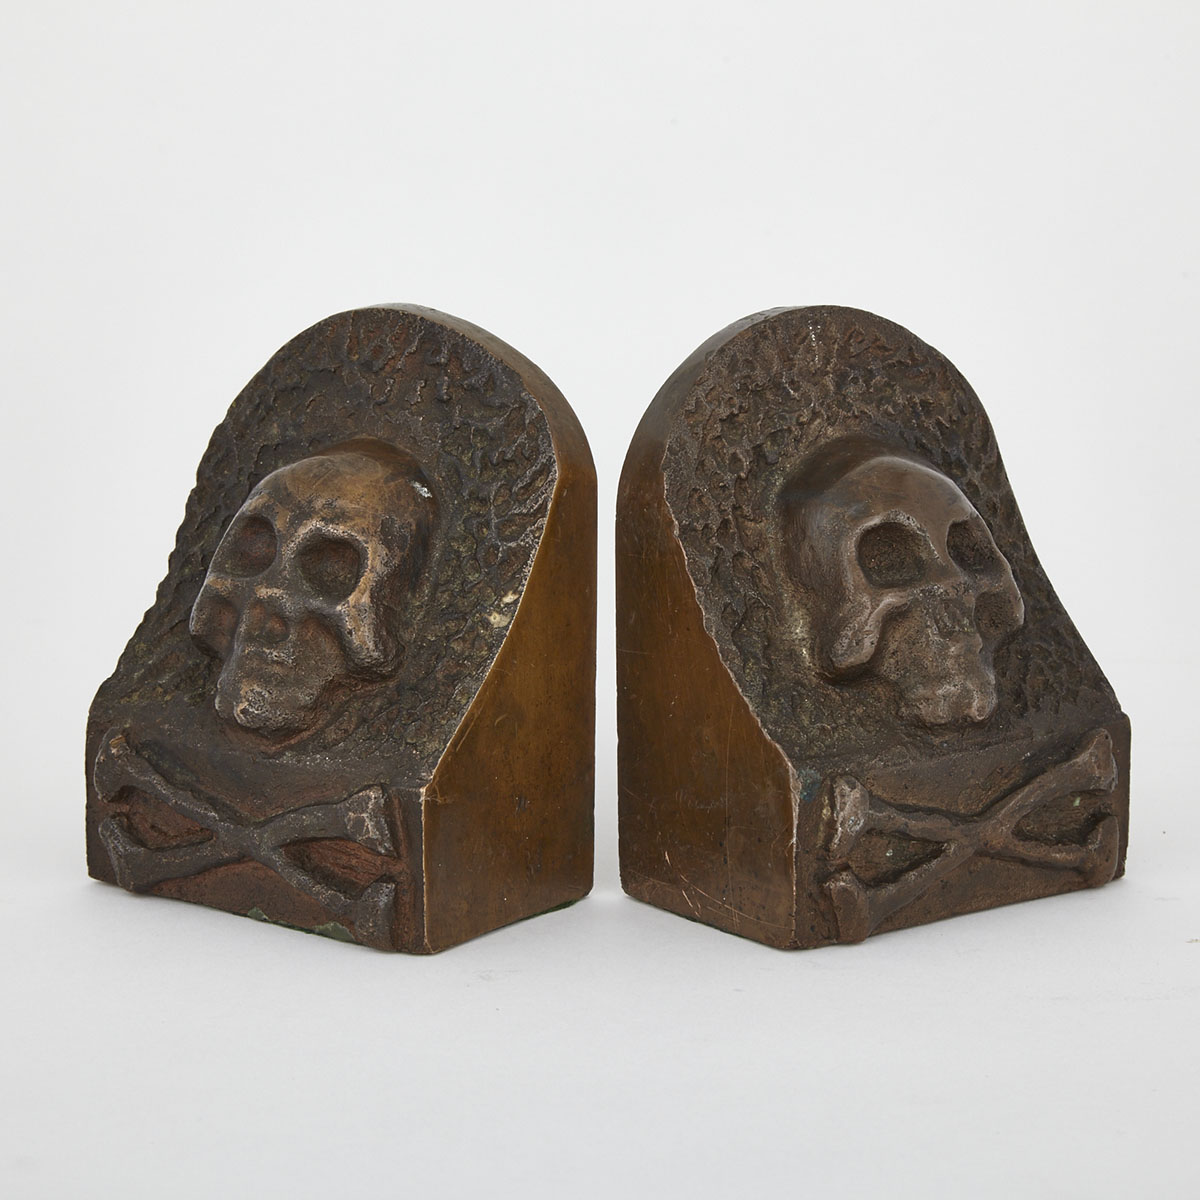 Pair of Cast Solid Bronze ‘Skull and Crossbones’ Bookends, early 20th century